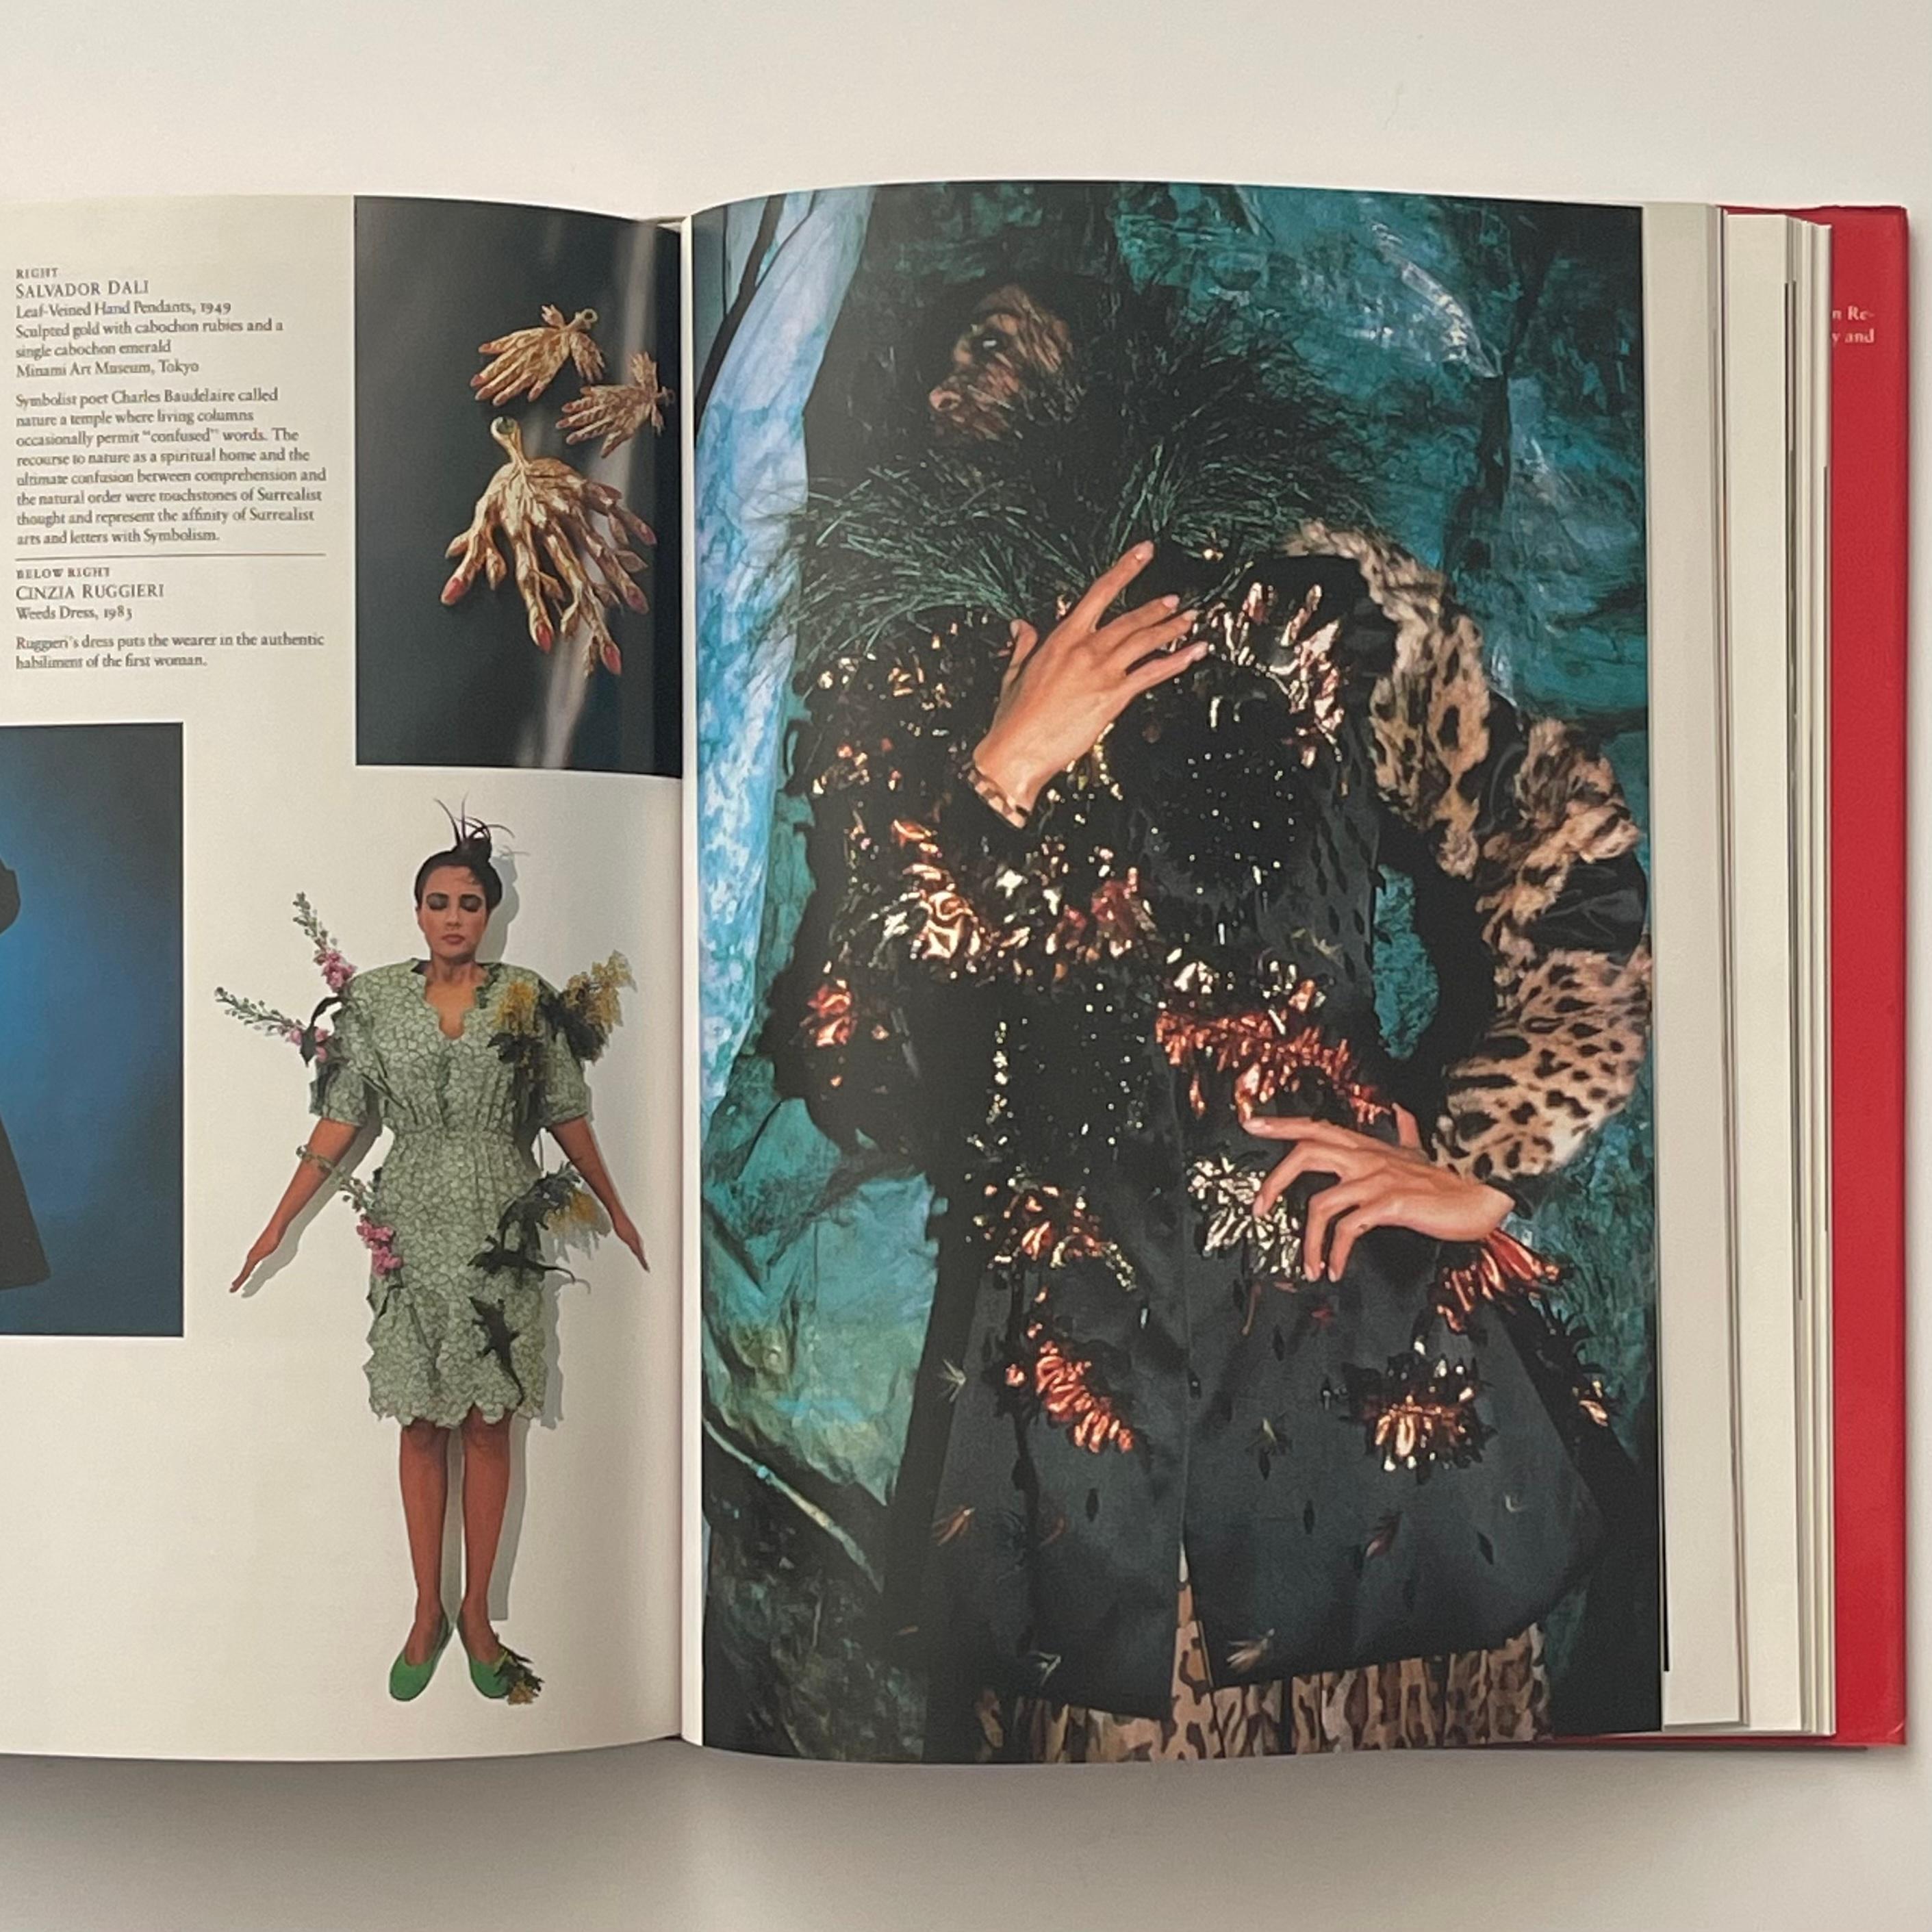 Fashion and Surrealism by Richard Martin 
Published by Rizzoli, New York, 1987

Fashion and Surrealism presents some of the most extravagant and ingenious images ever created in art and in the art of couture. from Surrealisms founding in the